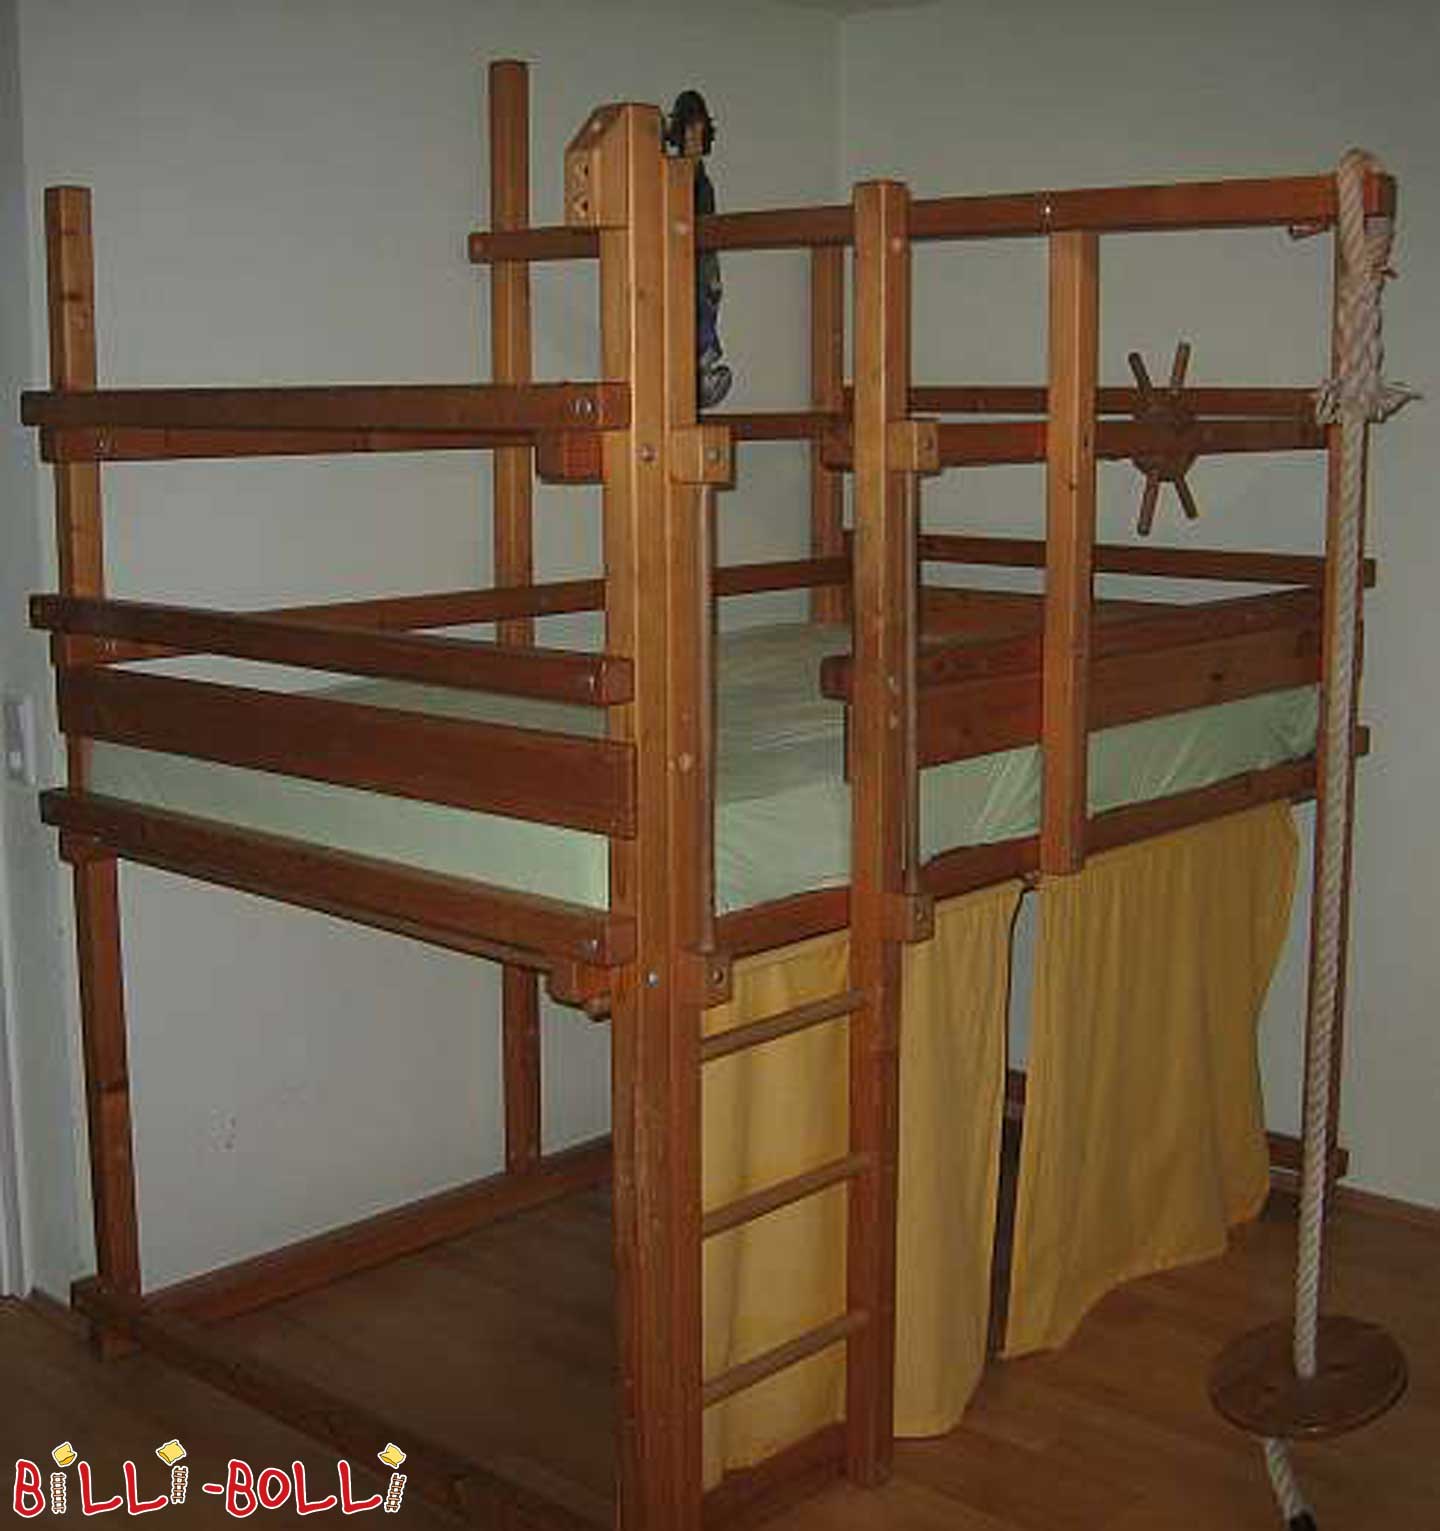 Pirate bed (Category: second hand loft bed)